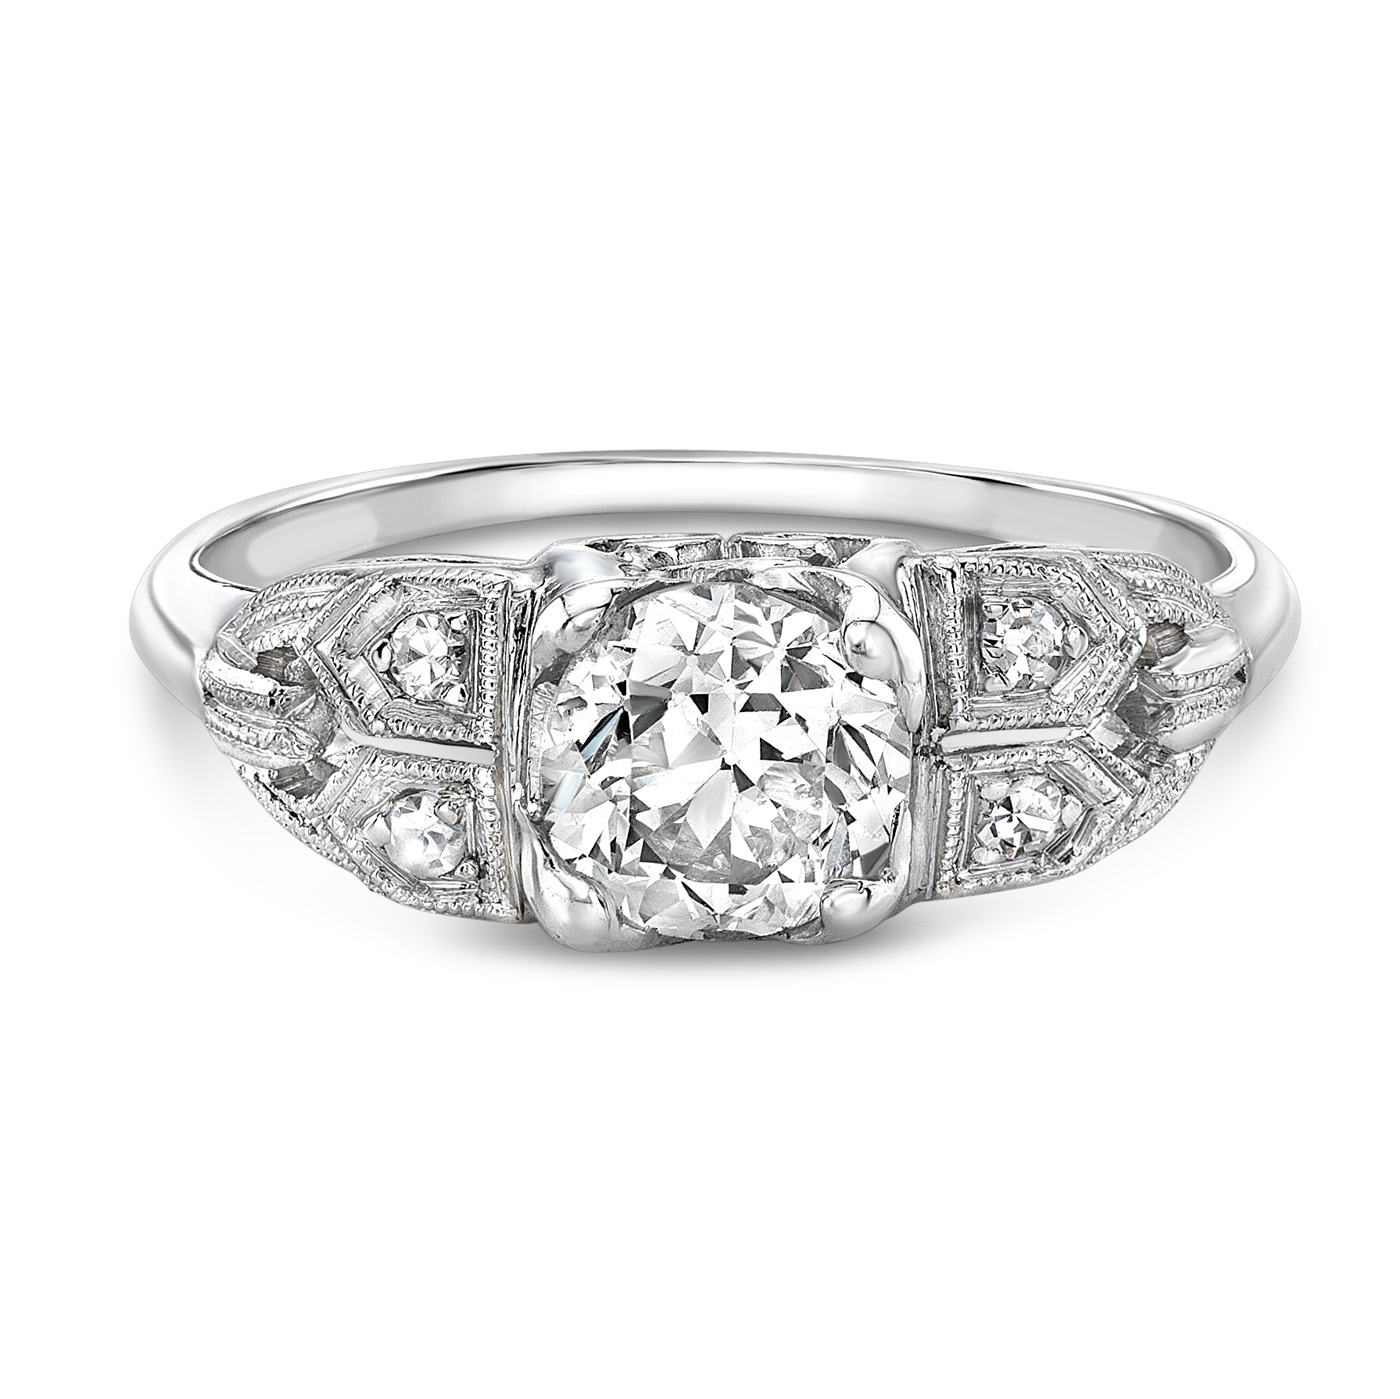 Vintage Platinum & Diamond Engagement Ring from the 1920s